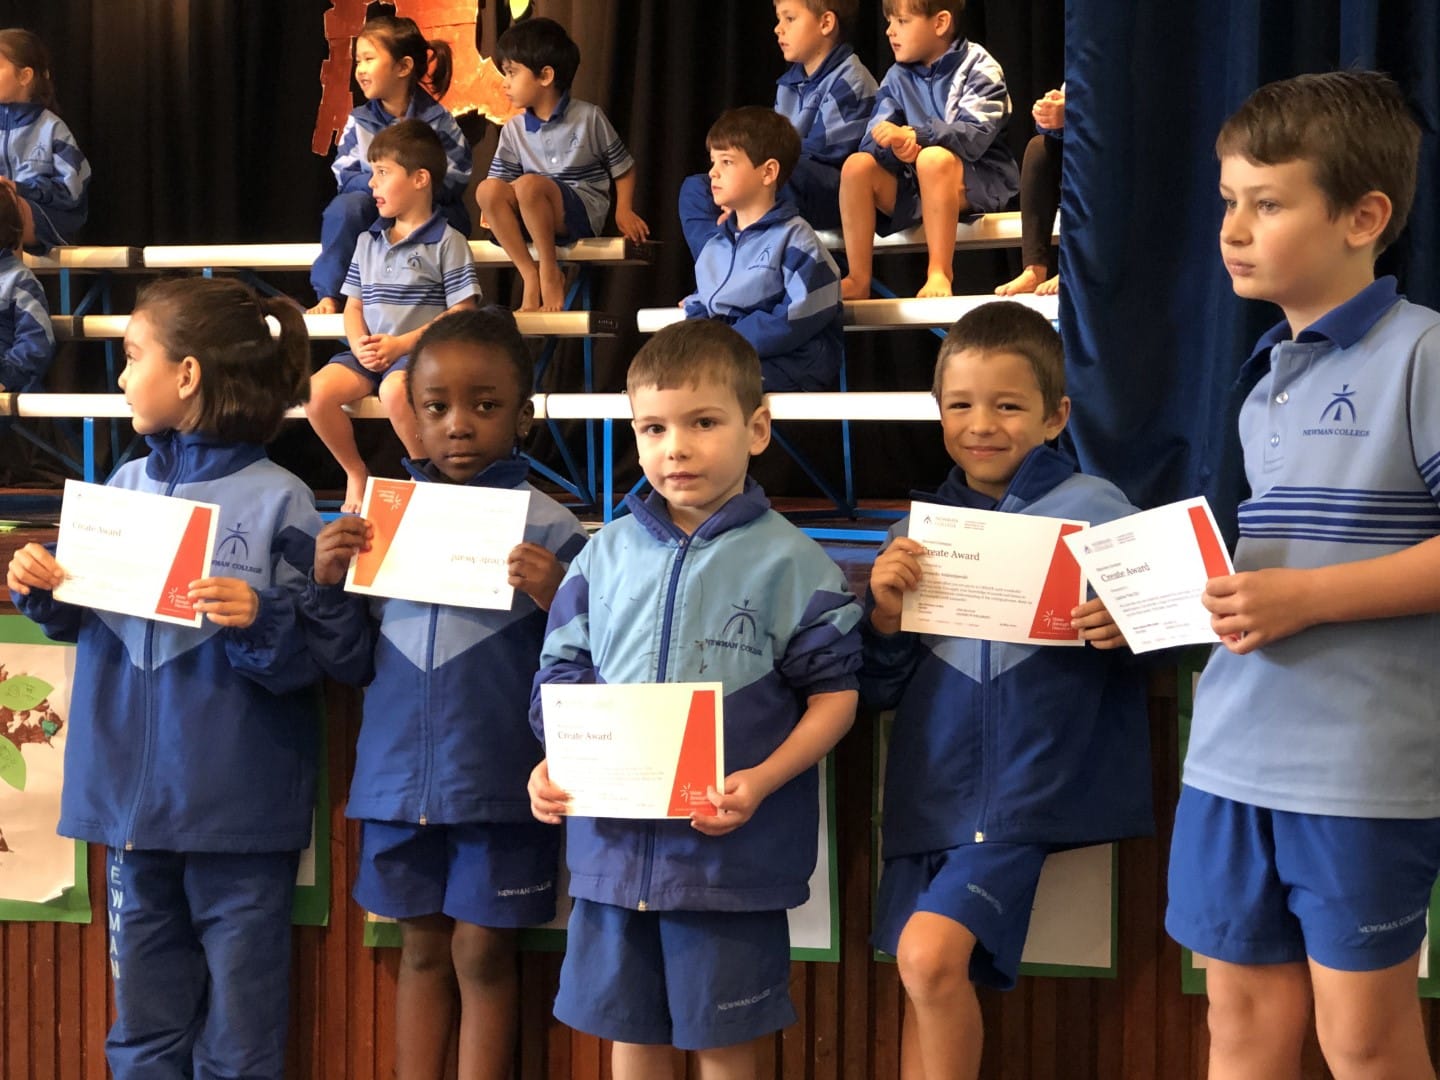 Newman News Term 2 Week 6: From the Leader of Early Childhood